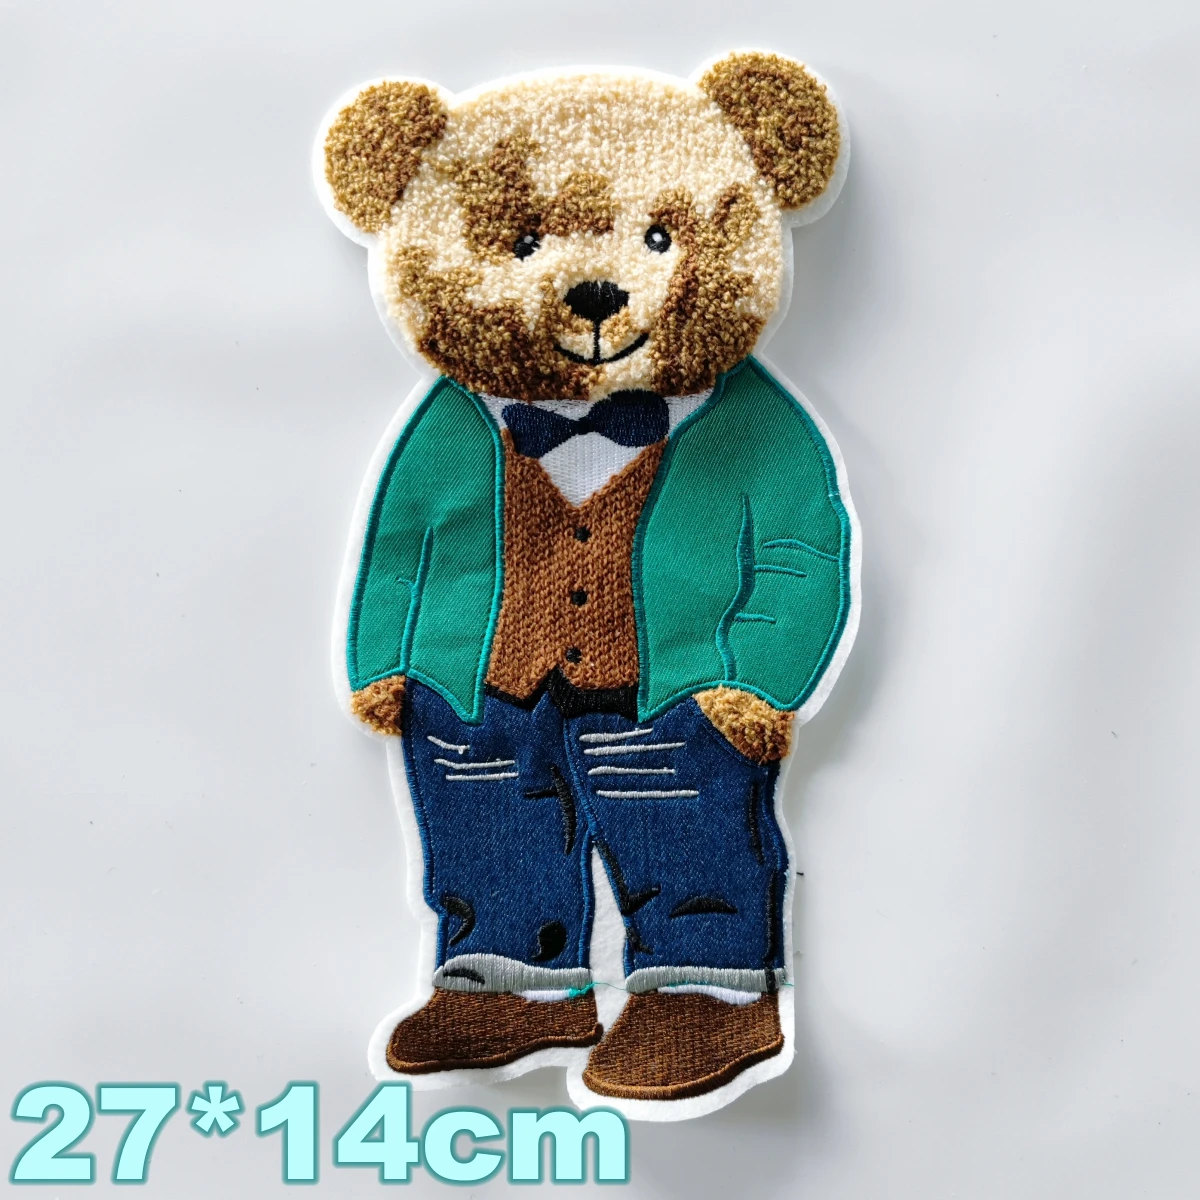 Bear Patch, Large Animal Patches for Jackets